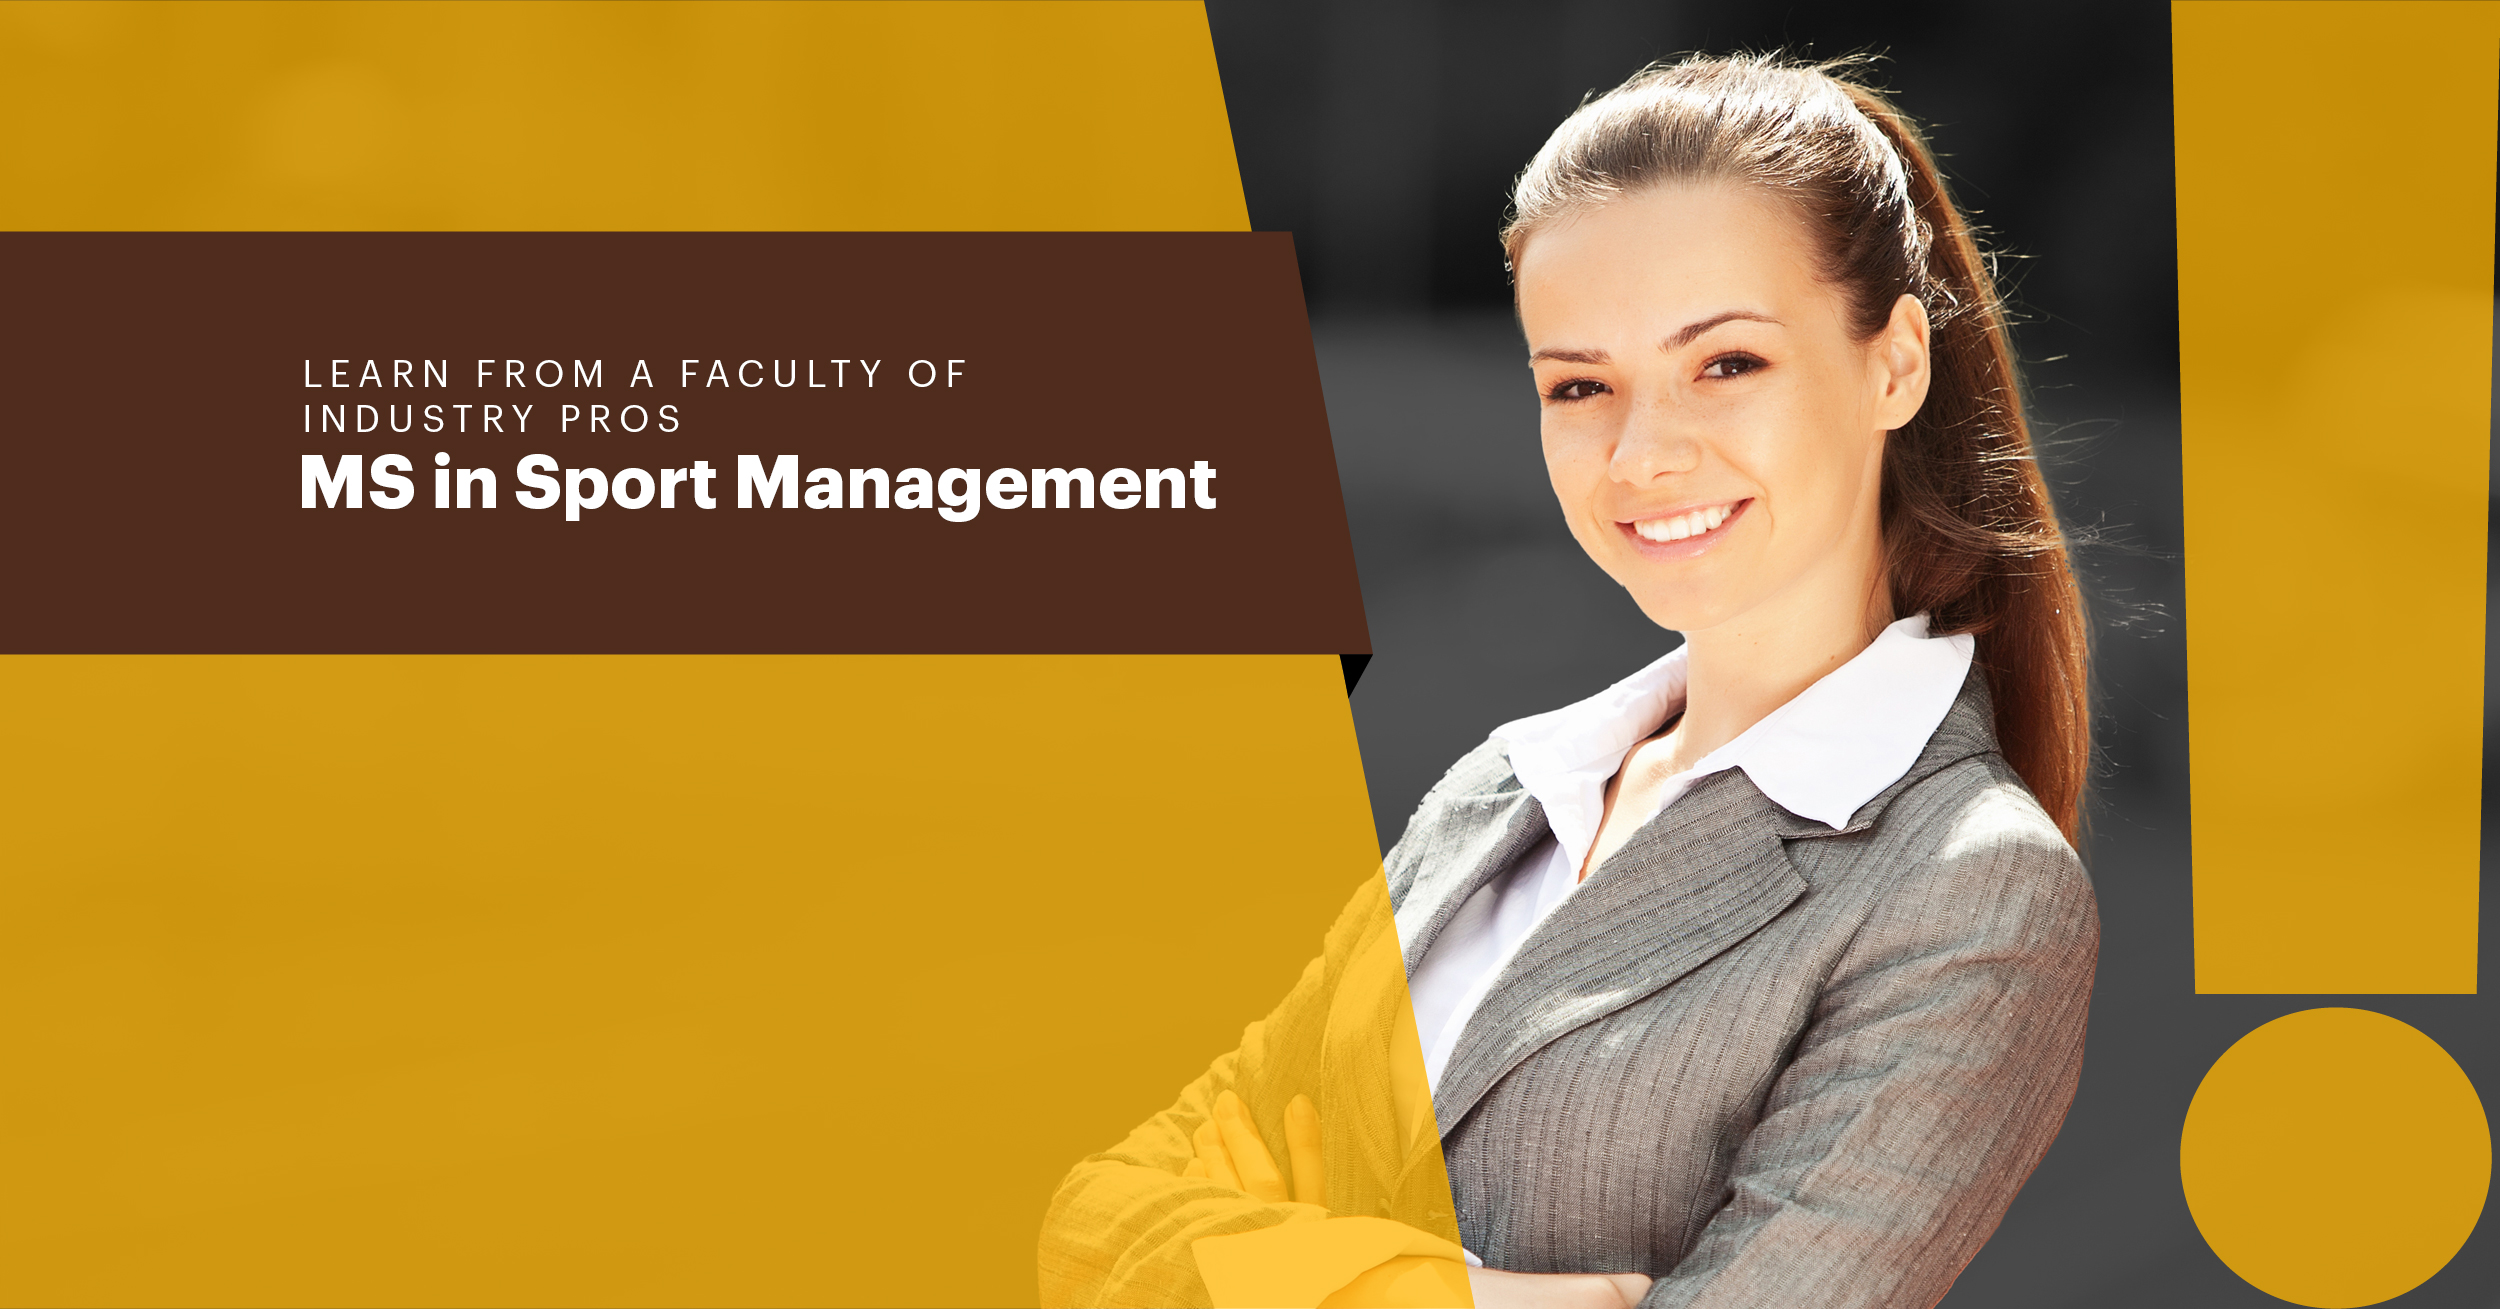 Learn from a faculty of industry pros MS in Sport Management